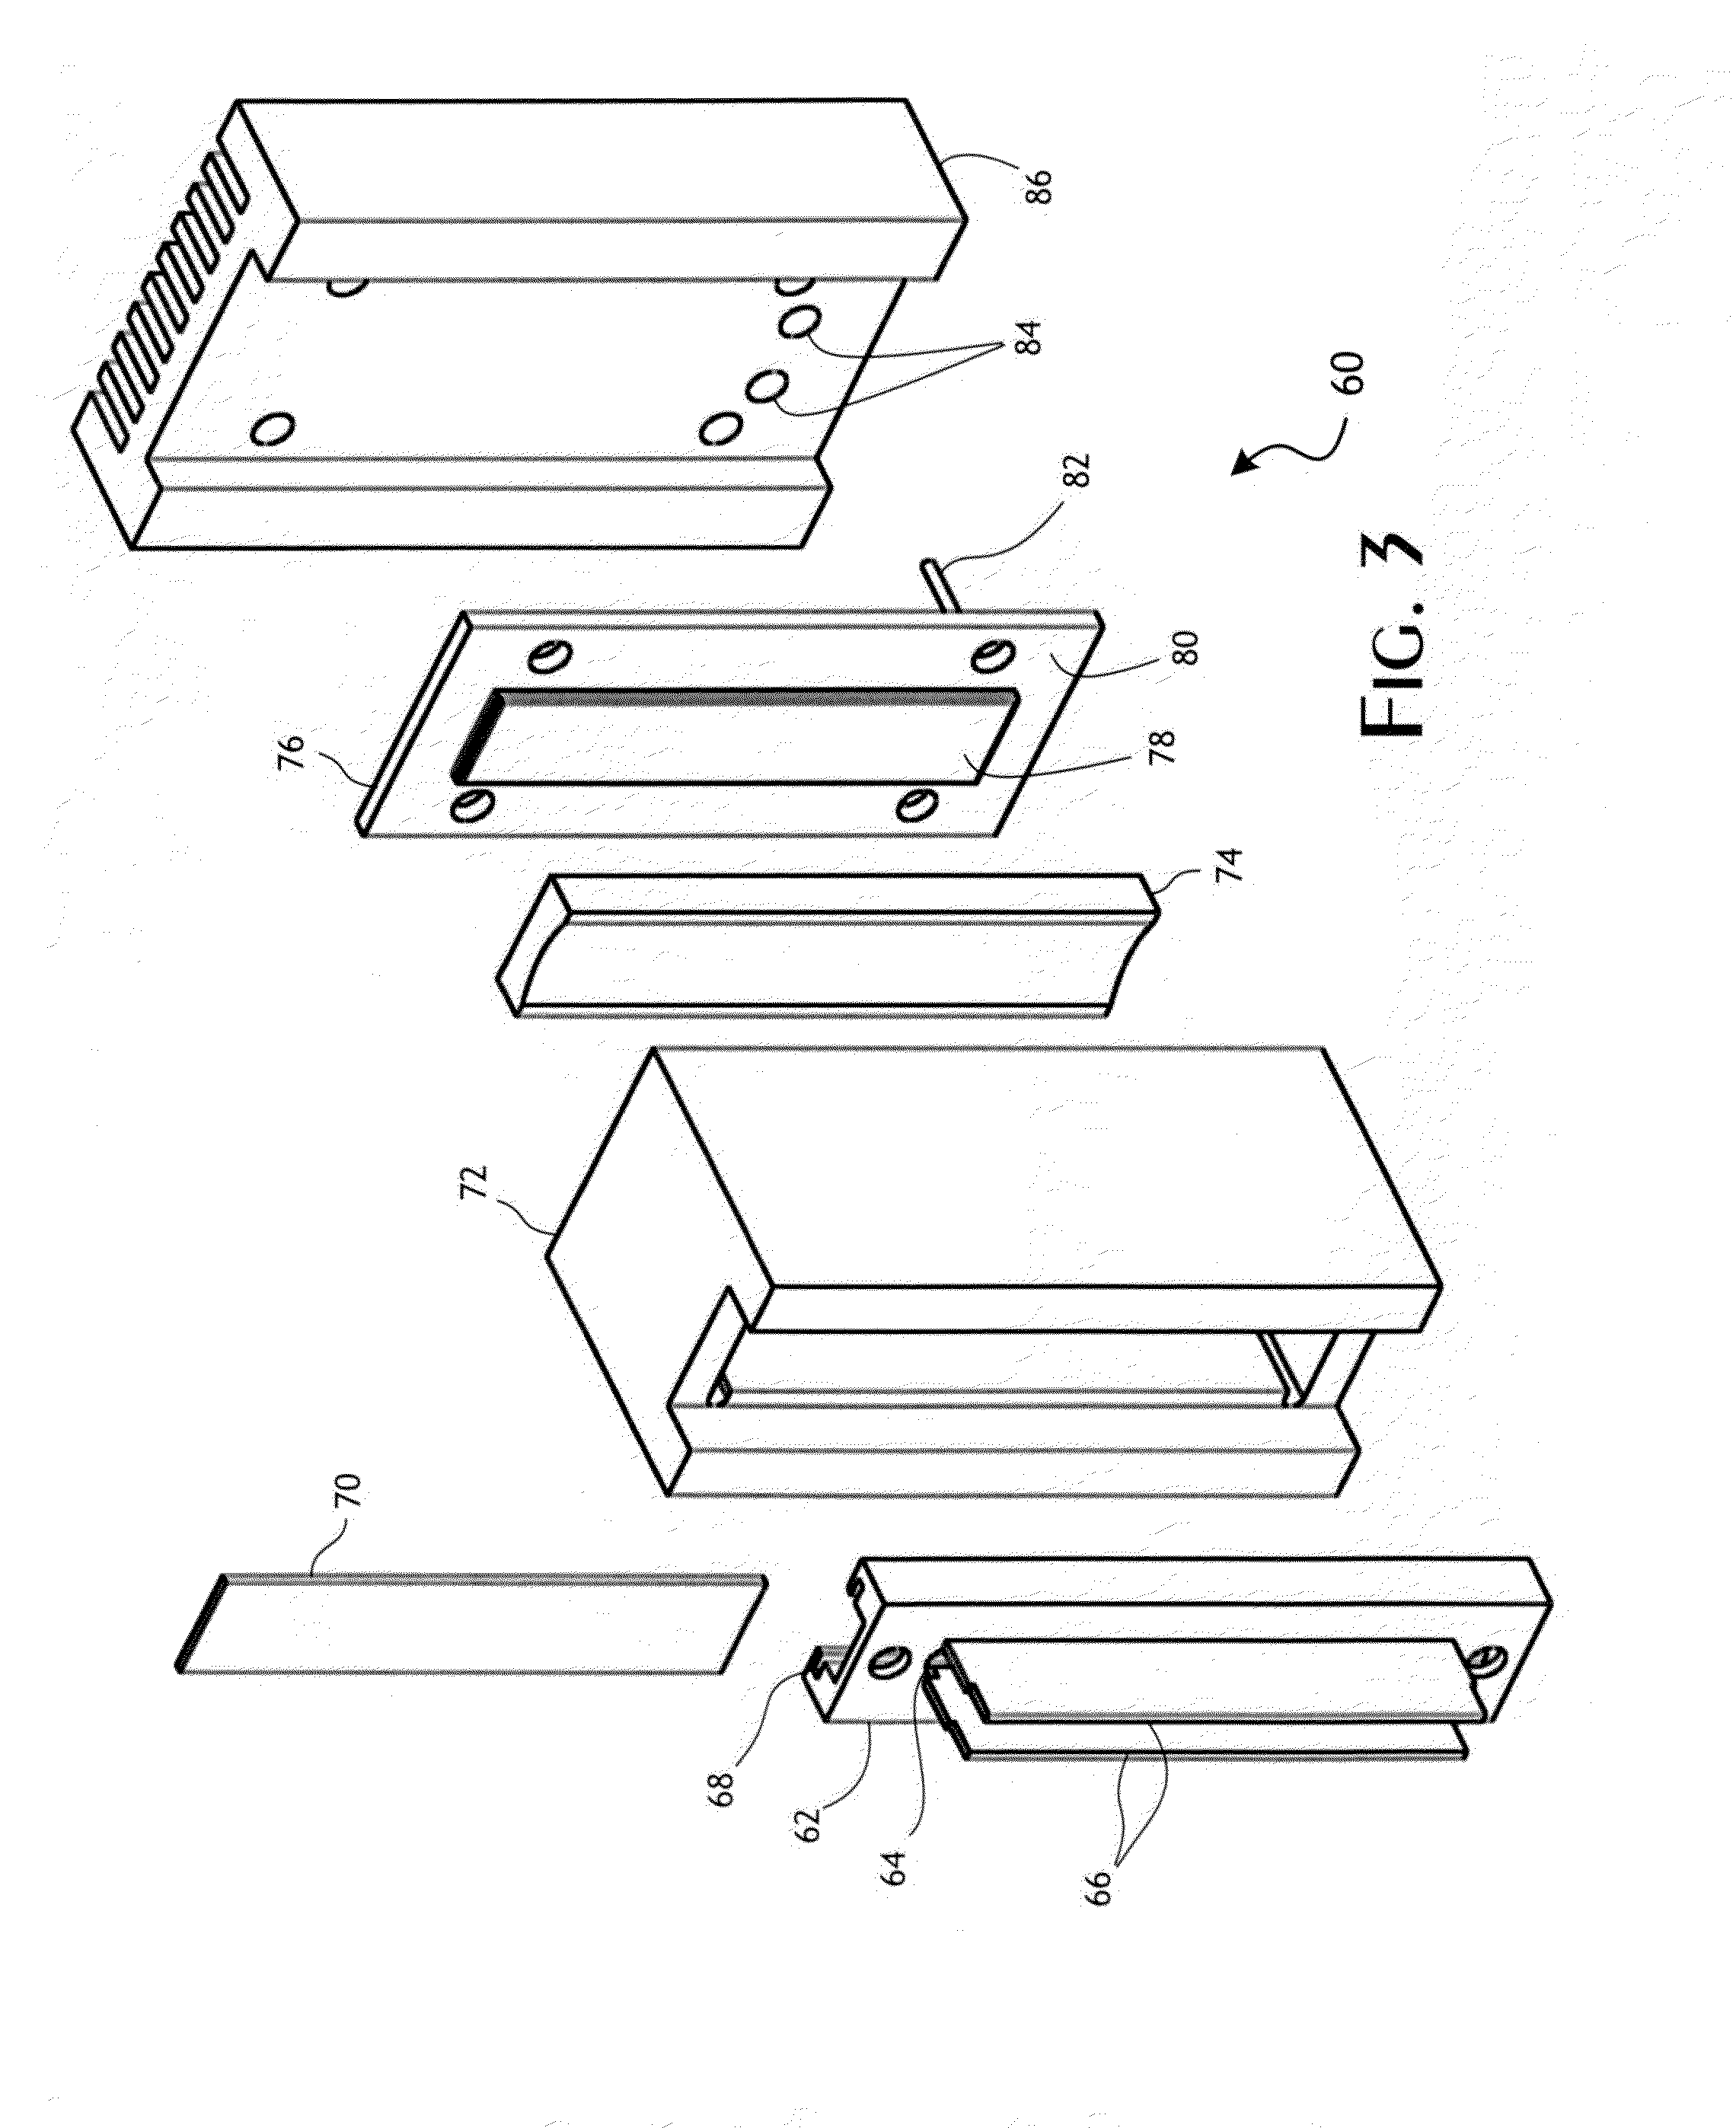 High intensity, strobed led micro-strip for microfilm imaging system and methods